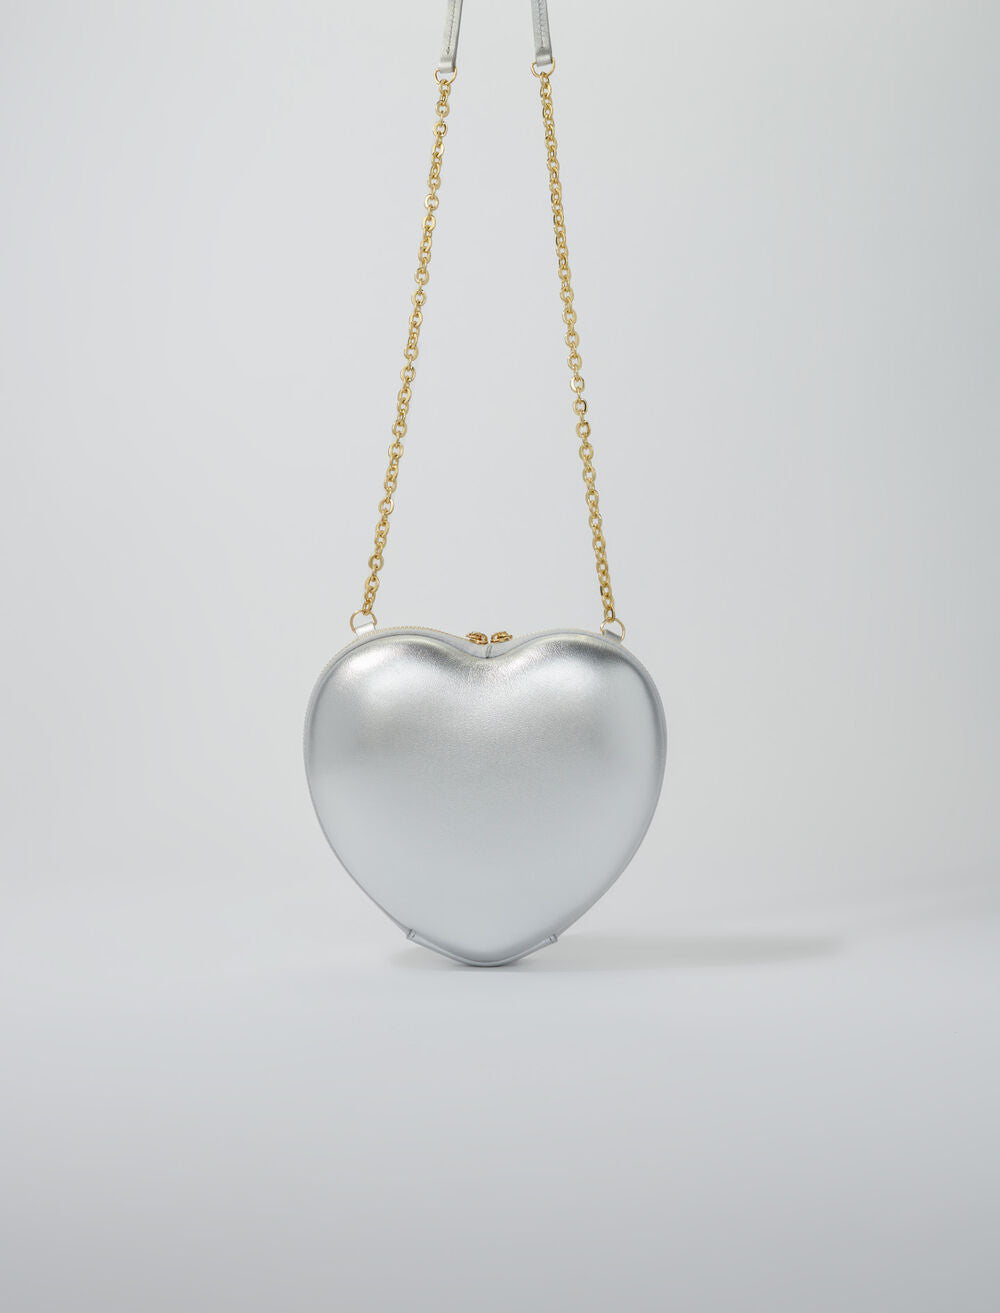 Silver-featured-Heart-shaped leather bag